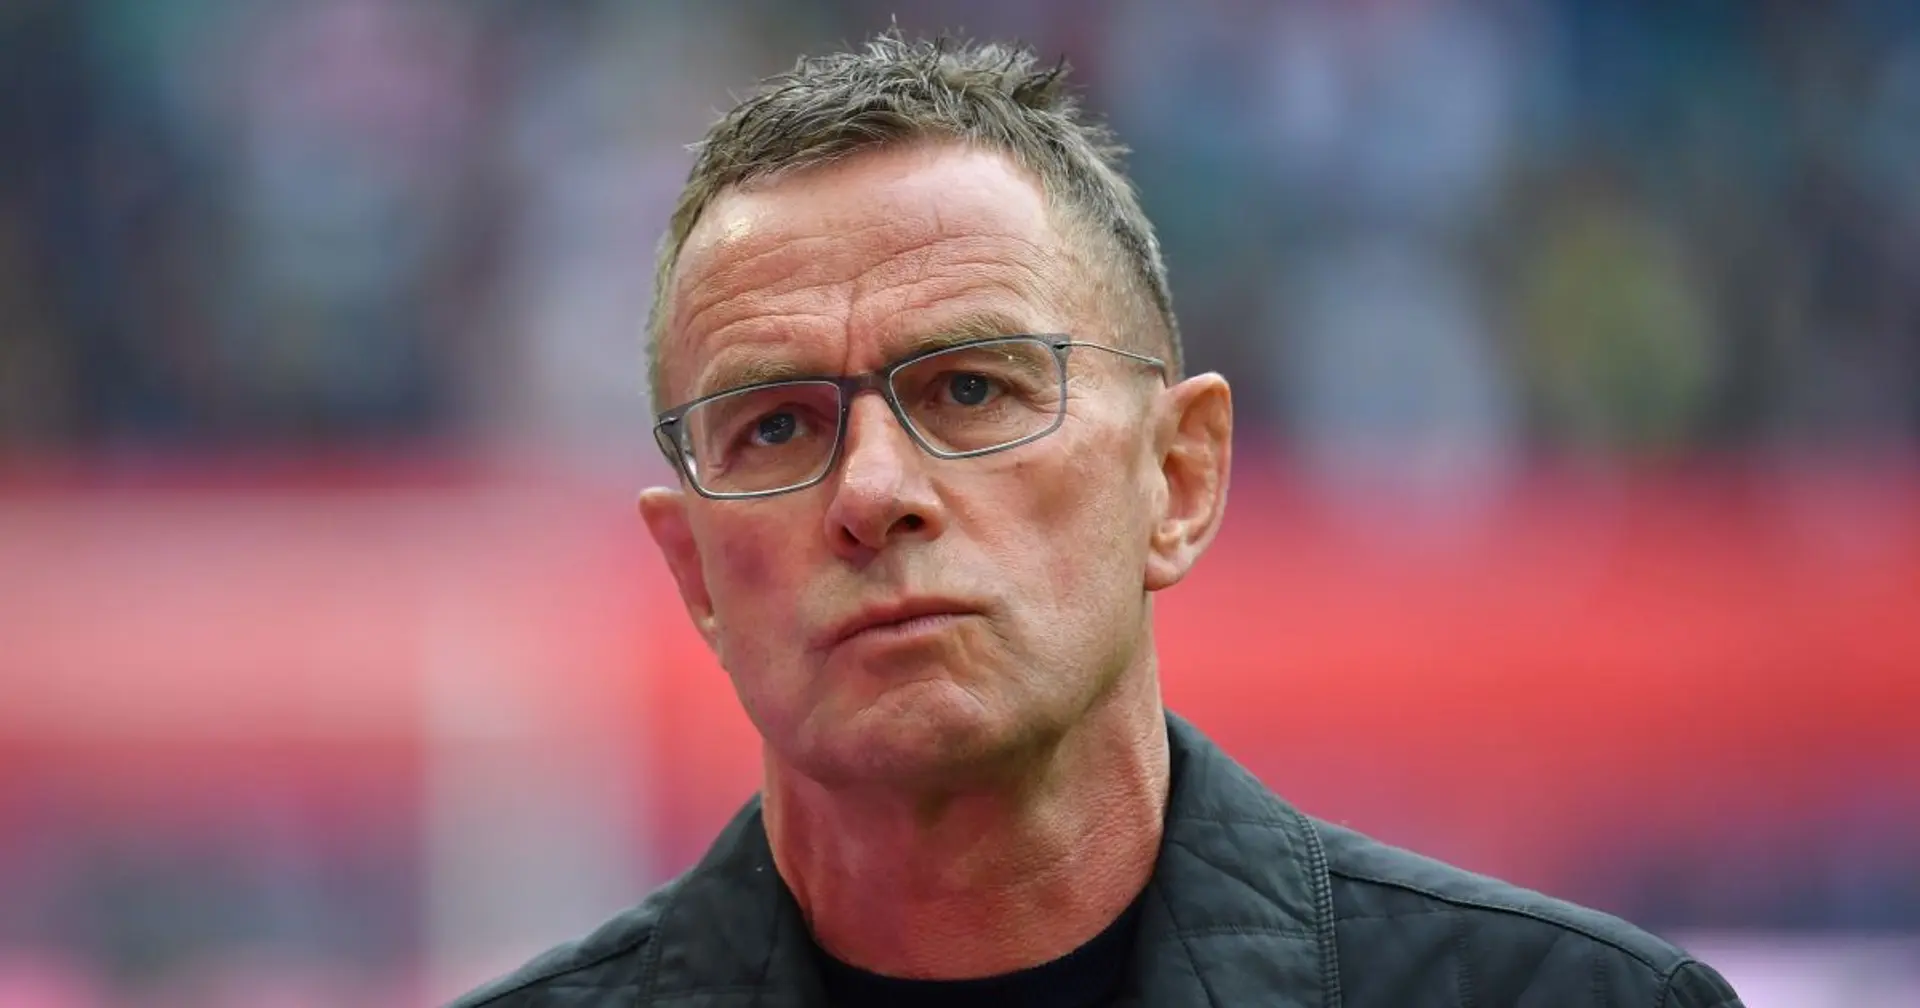 The Athletic: Man United reach agreement with Ralf Rangnick to become interim manager